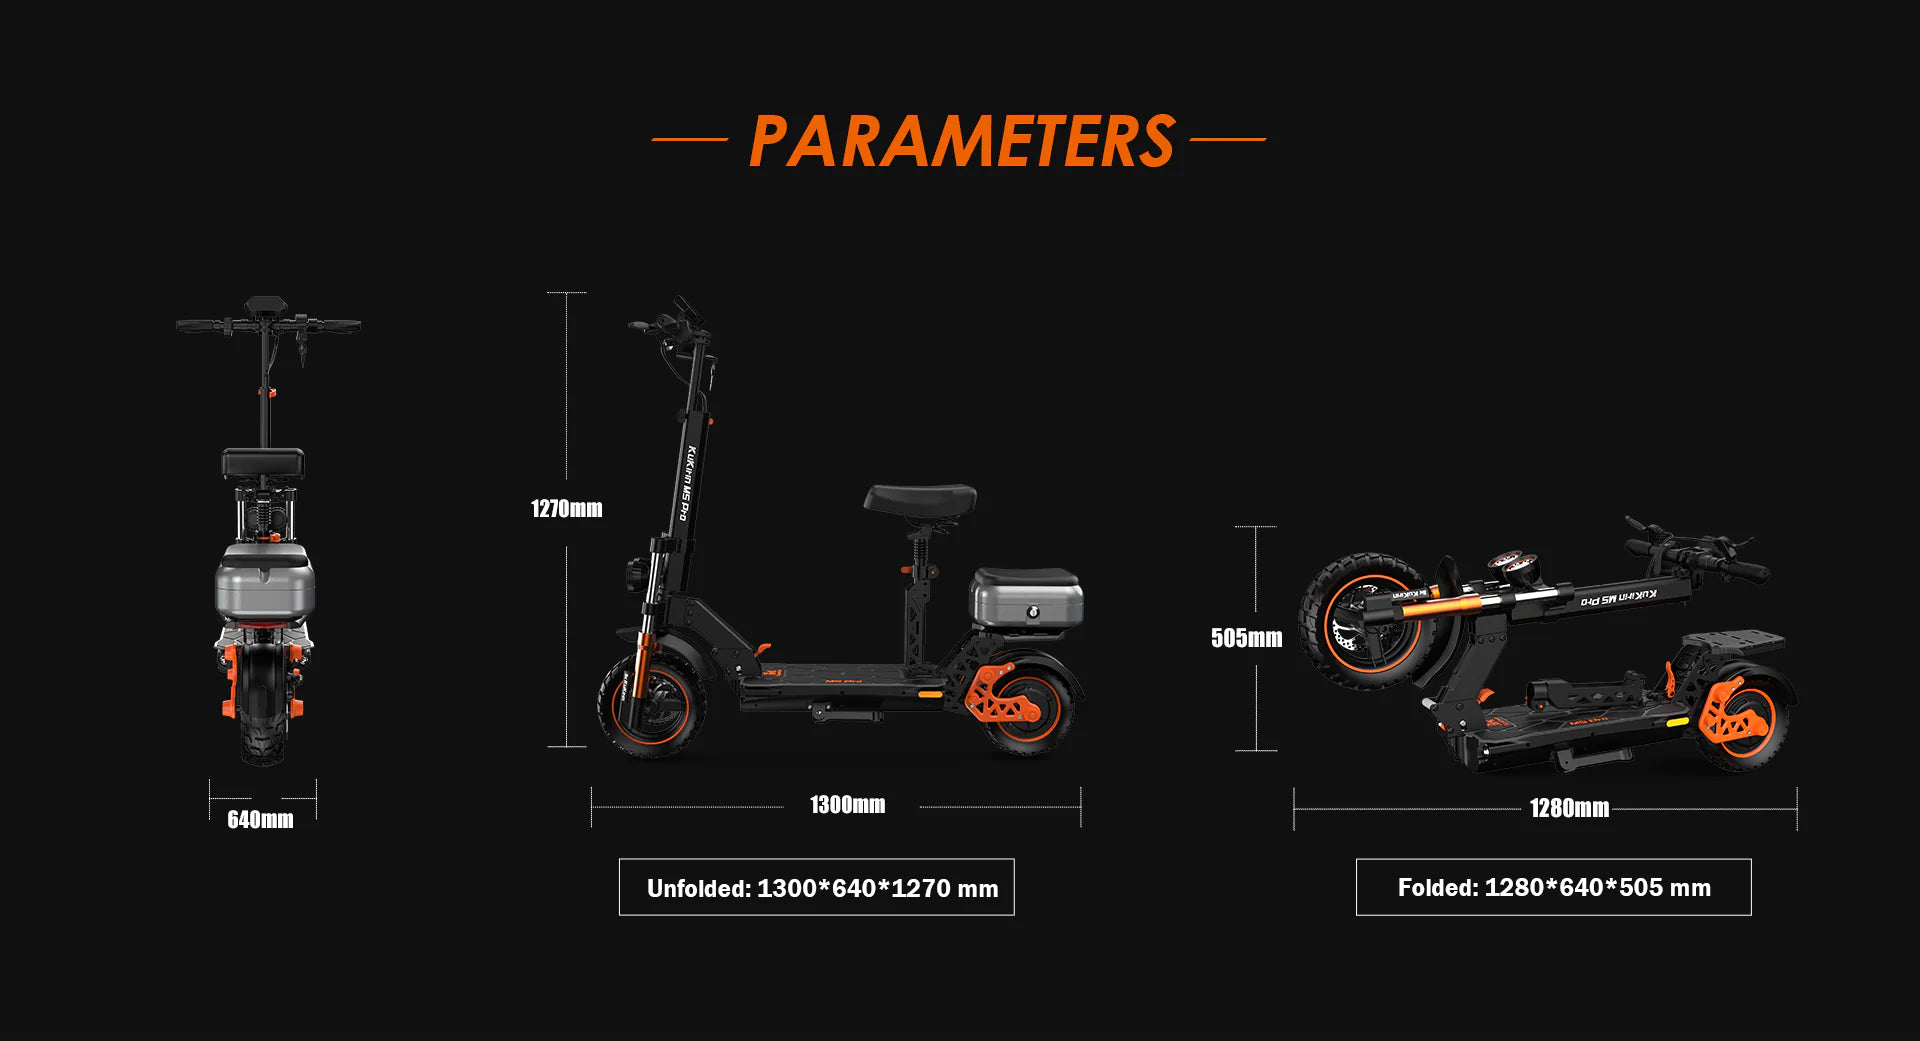 Conquer Any Terrain with KuKirin M5 PRO Electric Scooter - 1000W Motor, 960WH Battery